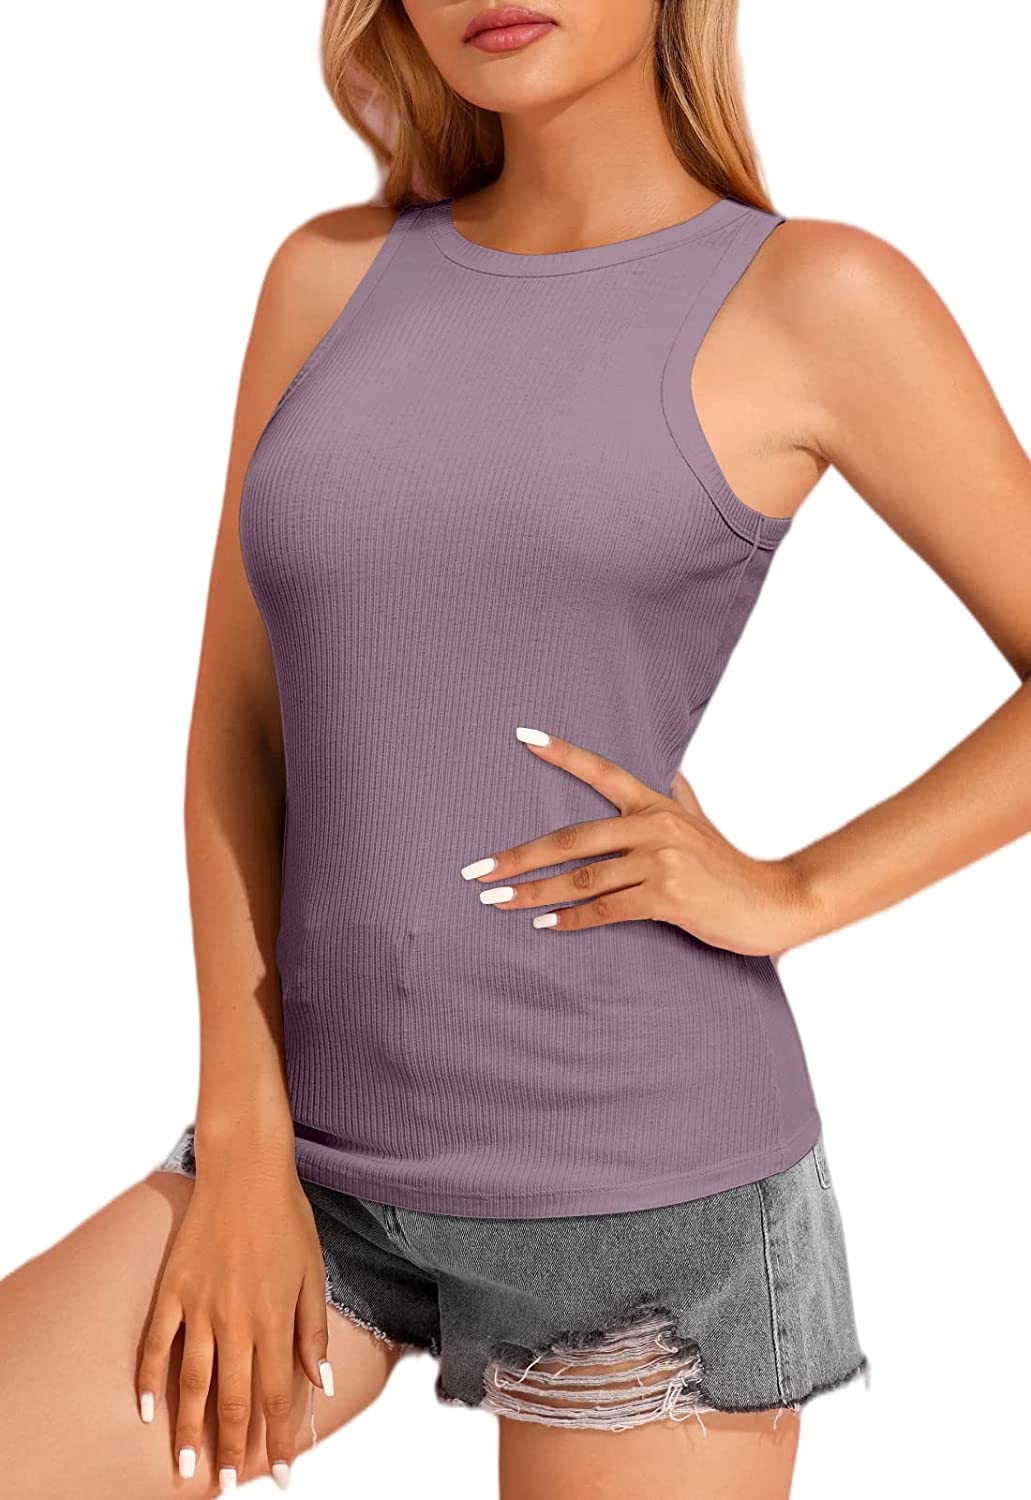 V FOR CITY Women's Ribbed Tank Top with Shelf Bra and Racerback - Long  Design, Moisture Wicking, Perfect for Workout and Everyday Wear